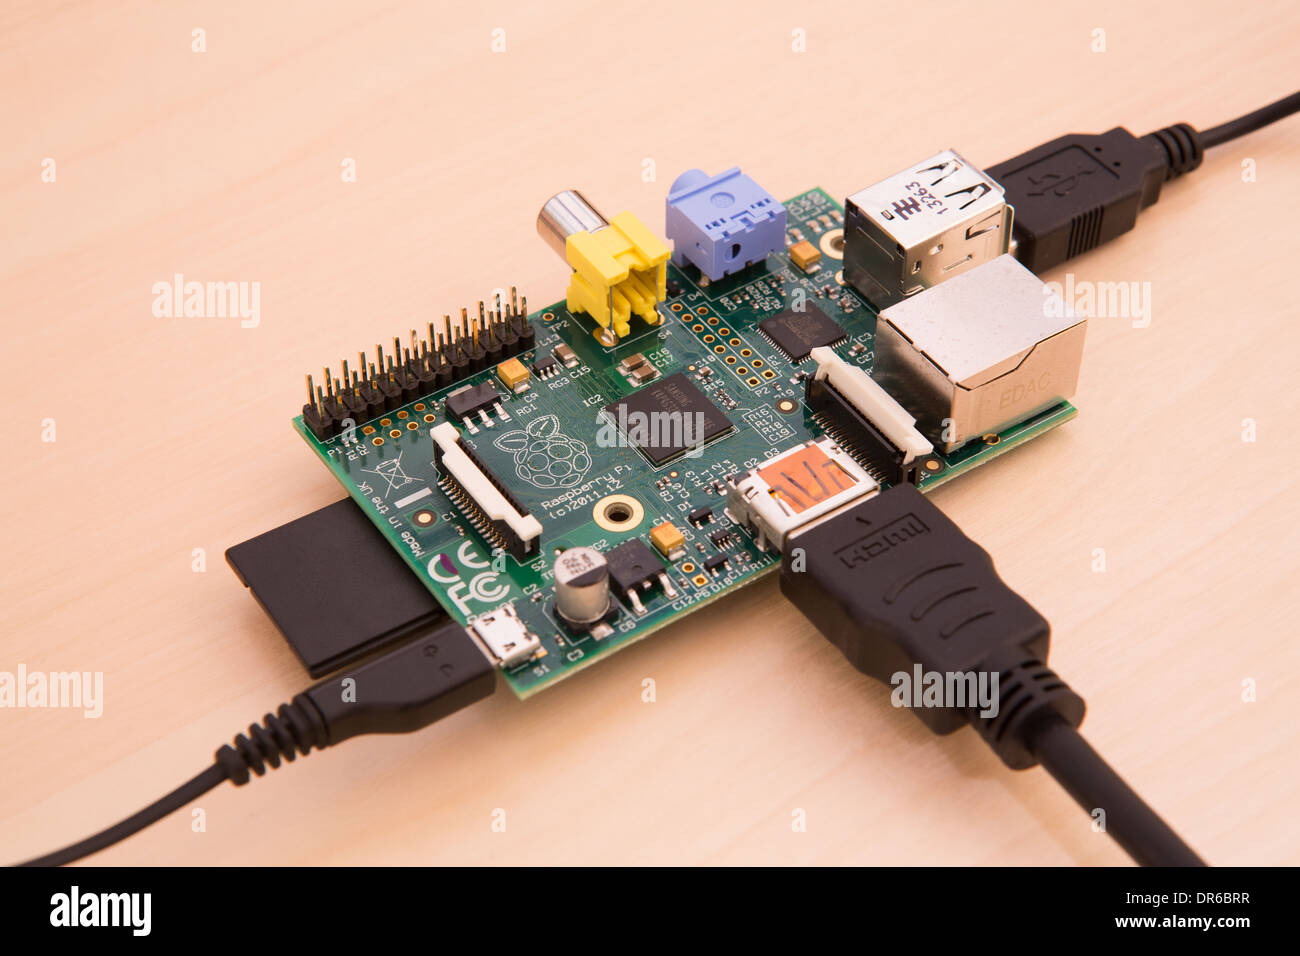 A Raspberry Pi circuit board with cables attached Stock Photo